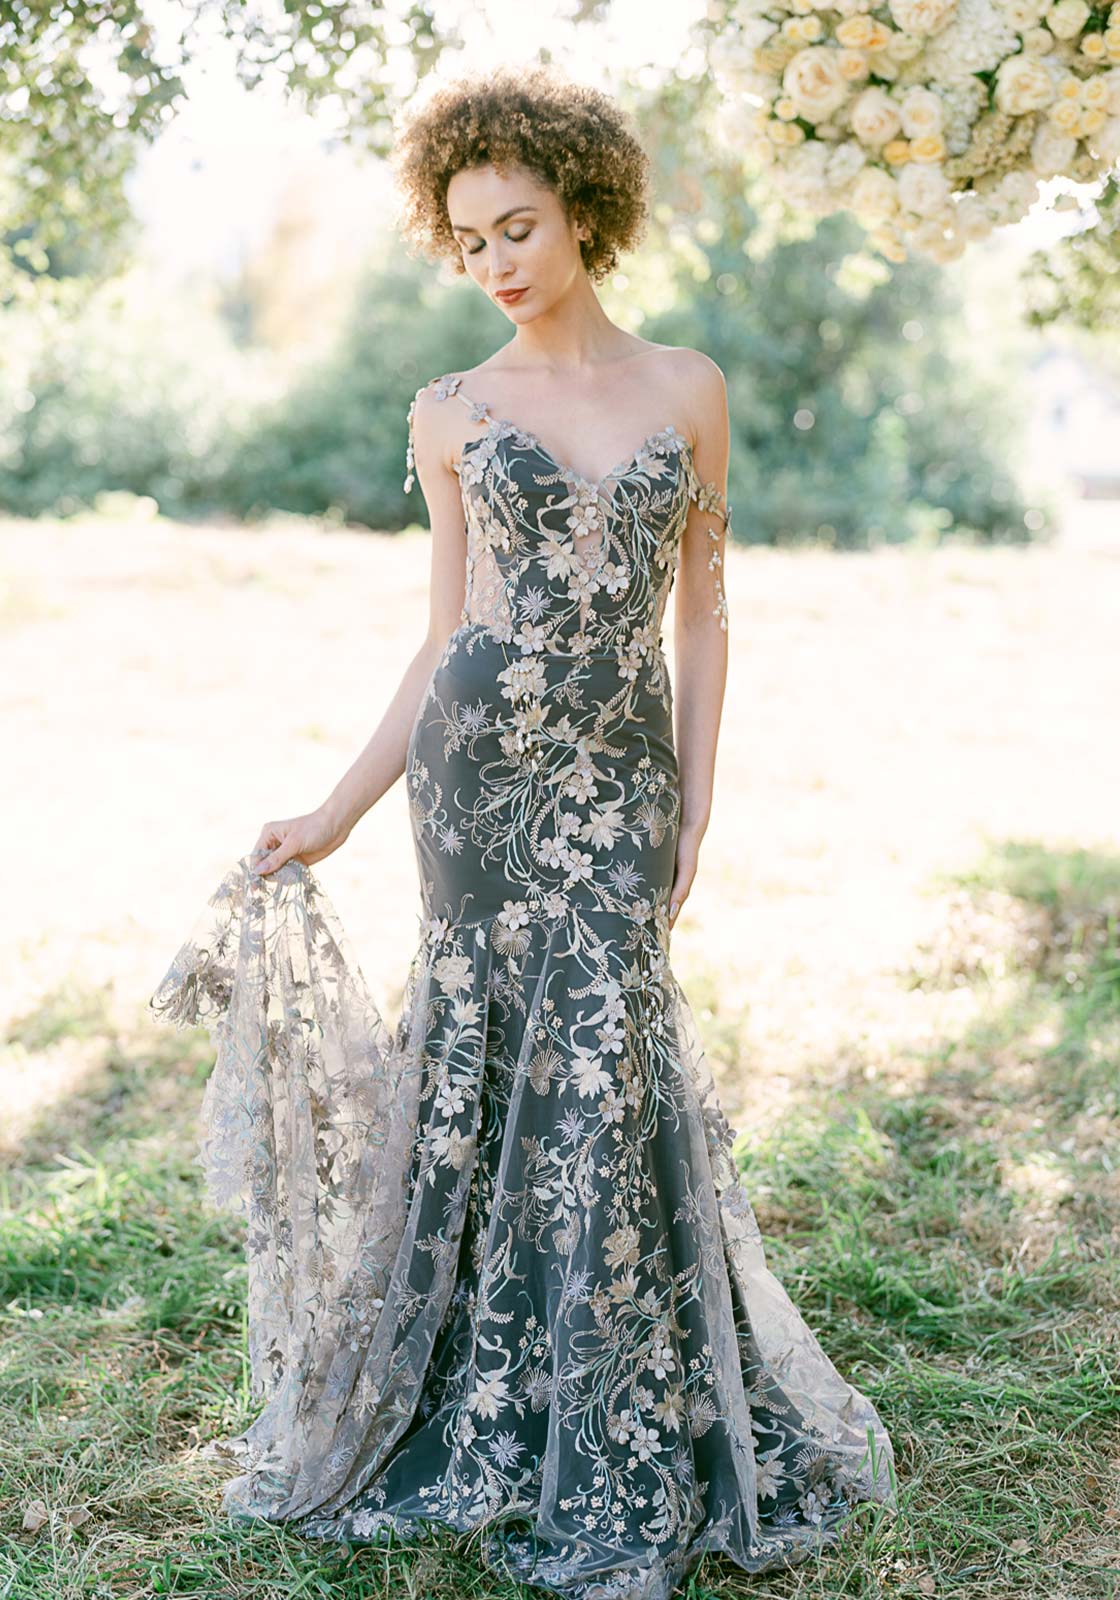 Lunaria wedding dress with black silk and pearl embellishments by Claire Petttibone